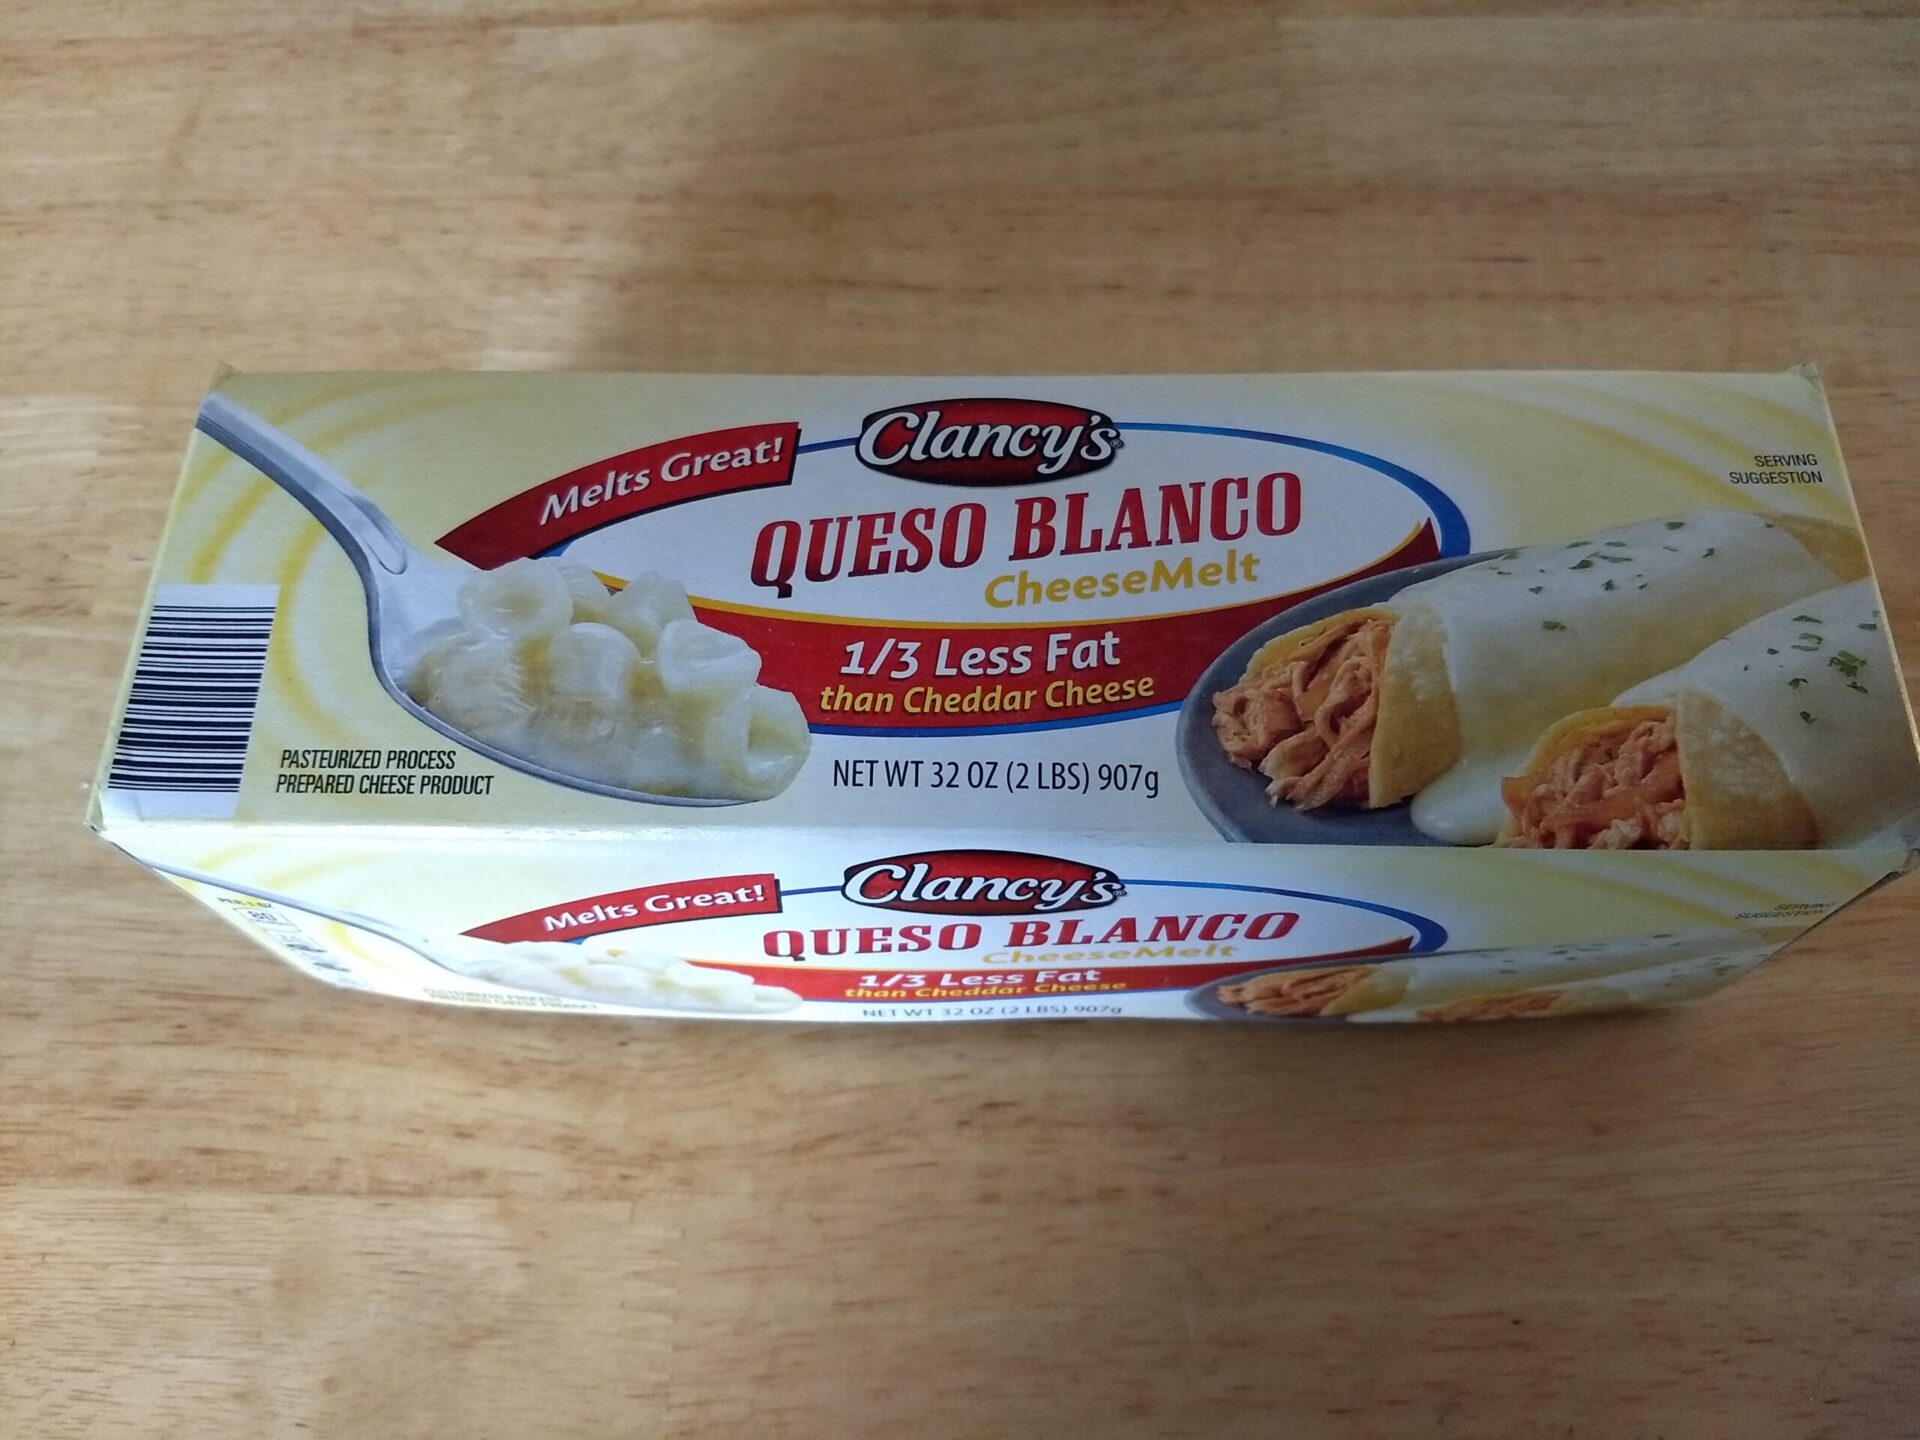 Clancy's Queso Blanco Cheese Melt